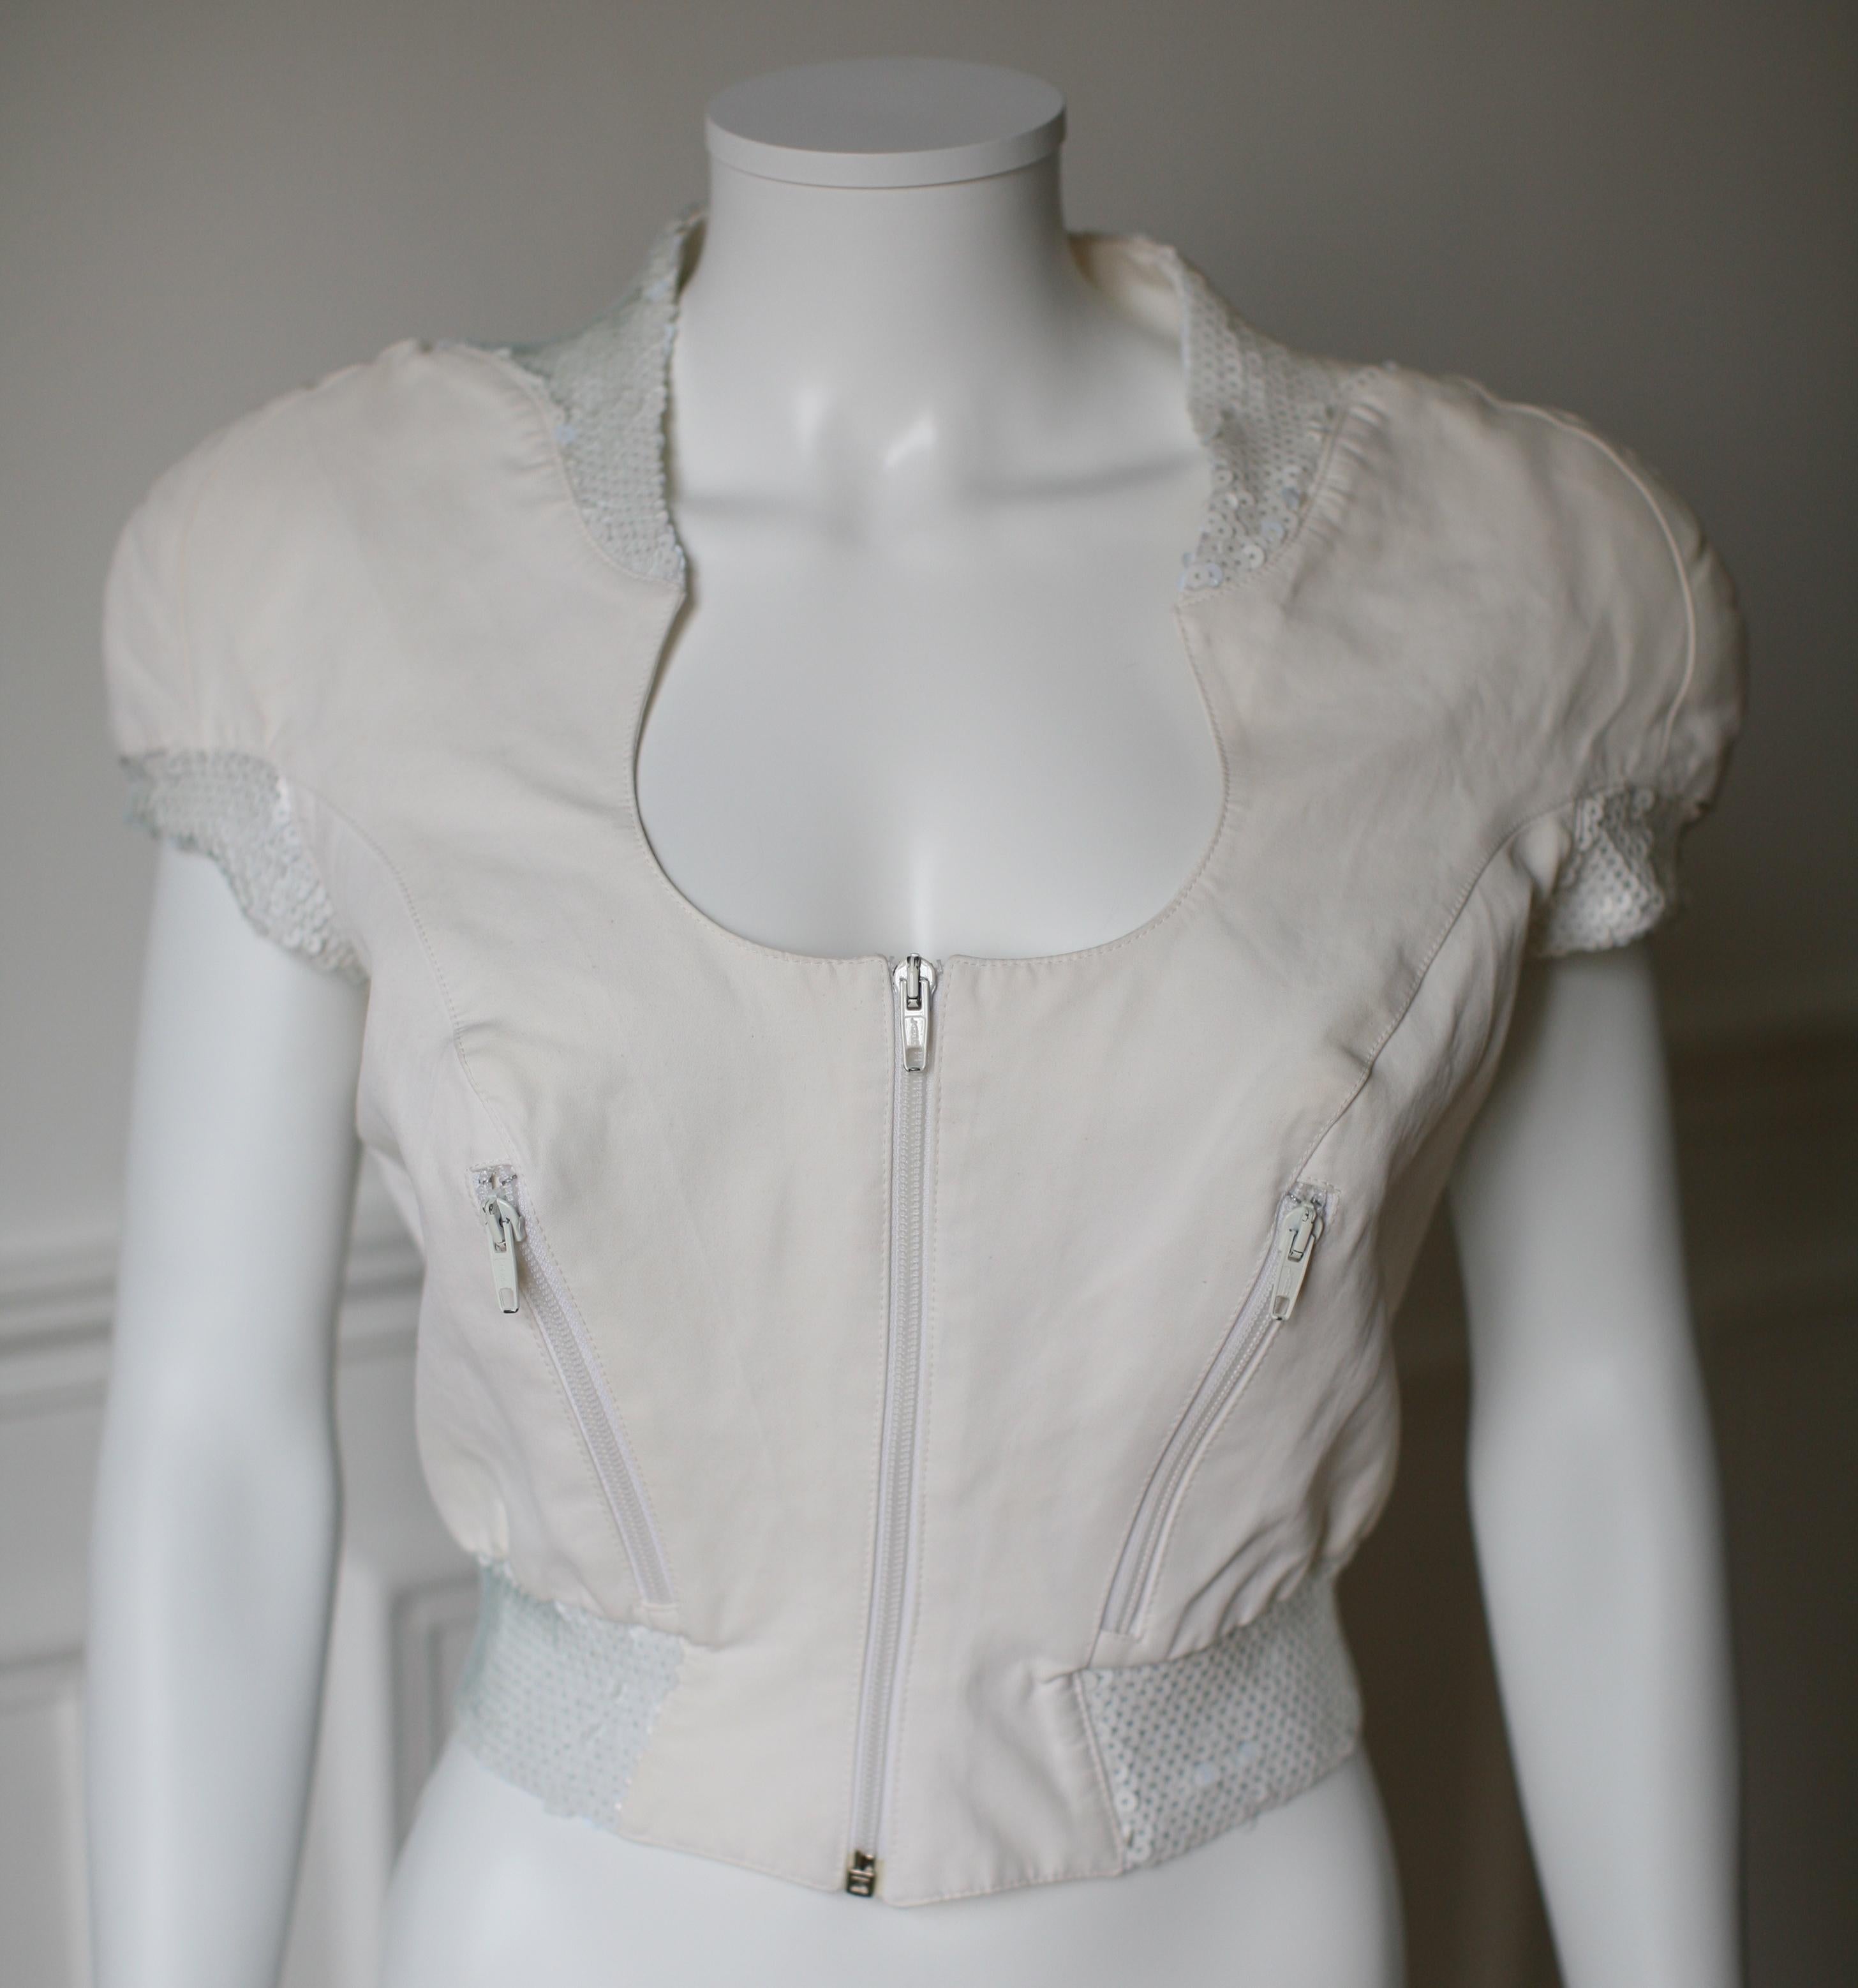 THIERRY MUGLER Activ, made in Italy, circa 90's. 
Cotton top with white sequins and a rounded neckline. 